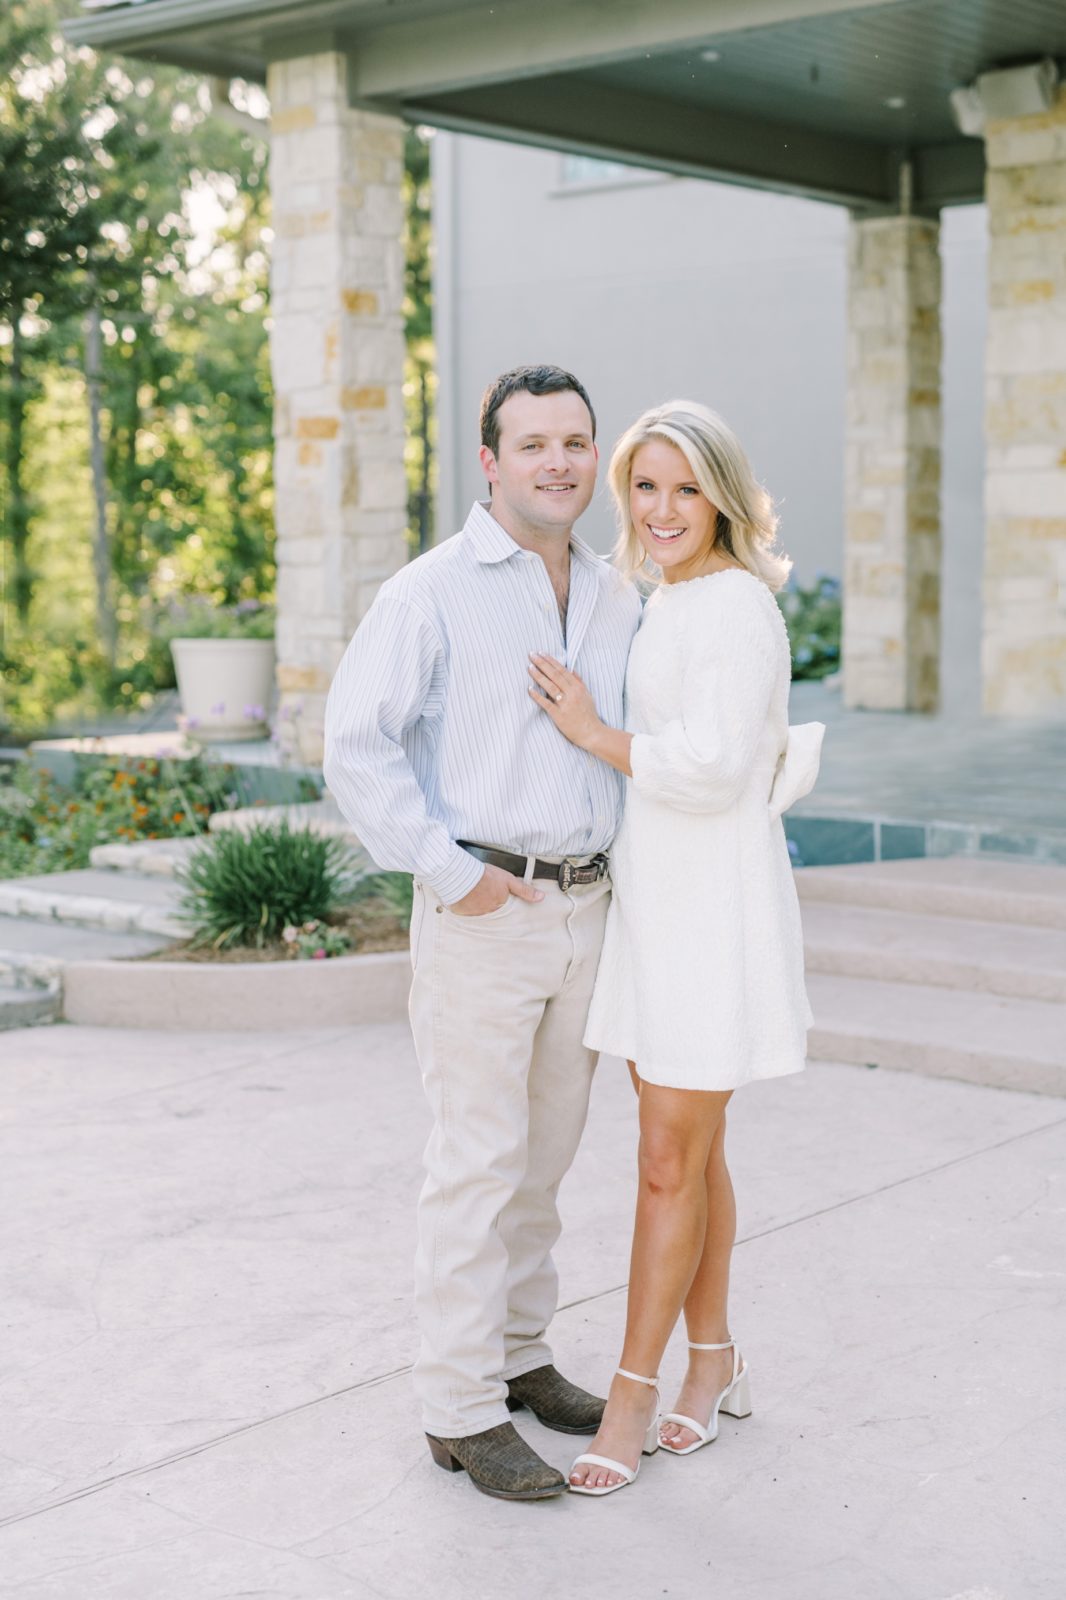 Woman in white and a man in a light blue smile for a portrait by Christina Elliott Photography. soon to be married wedding announcement pic #ChristinaElliottPhotography #ChristinaElliottEngagements #LakeLivingston #summerengagements #Texasphotographer